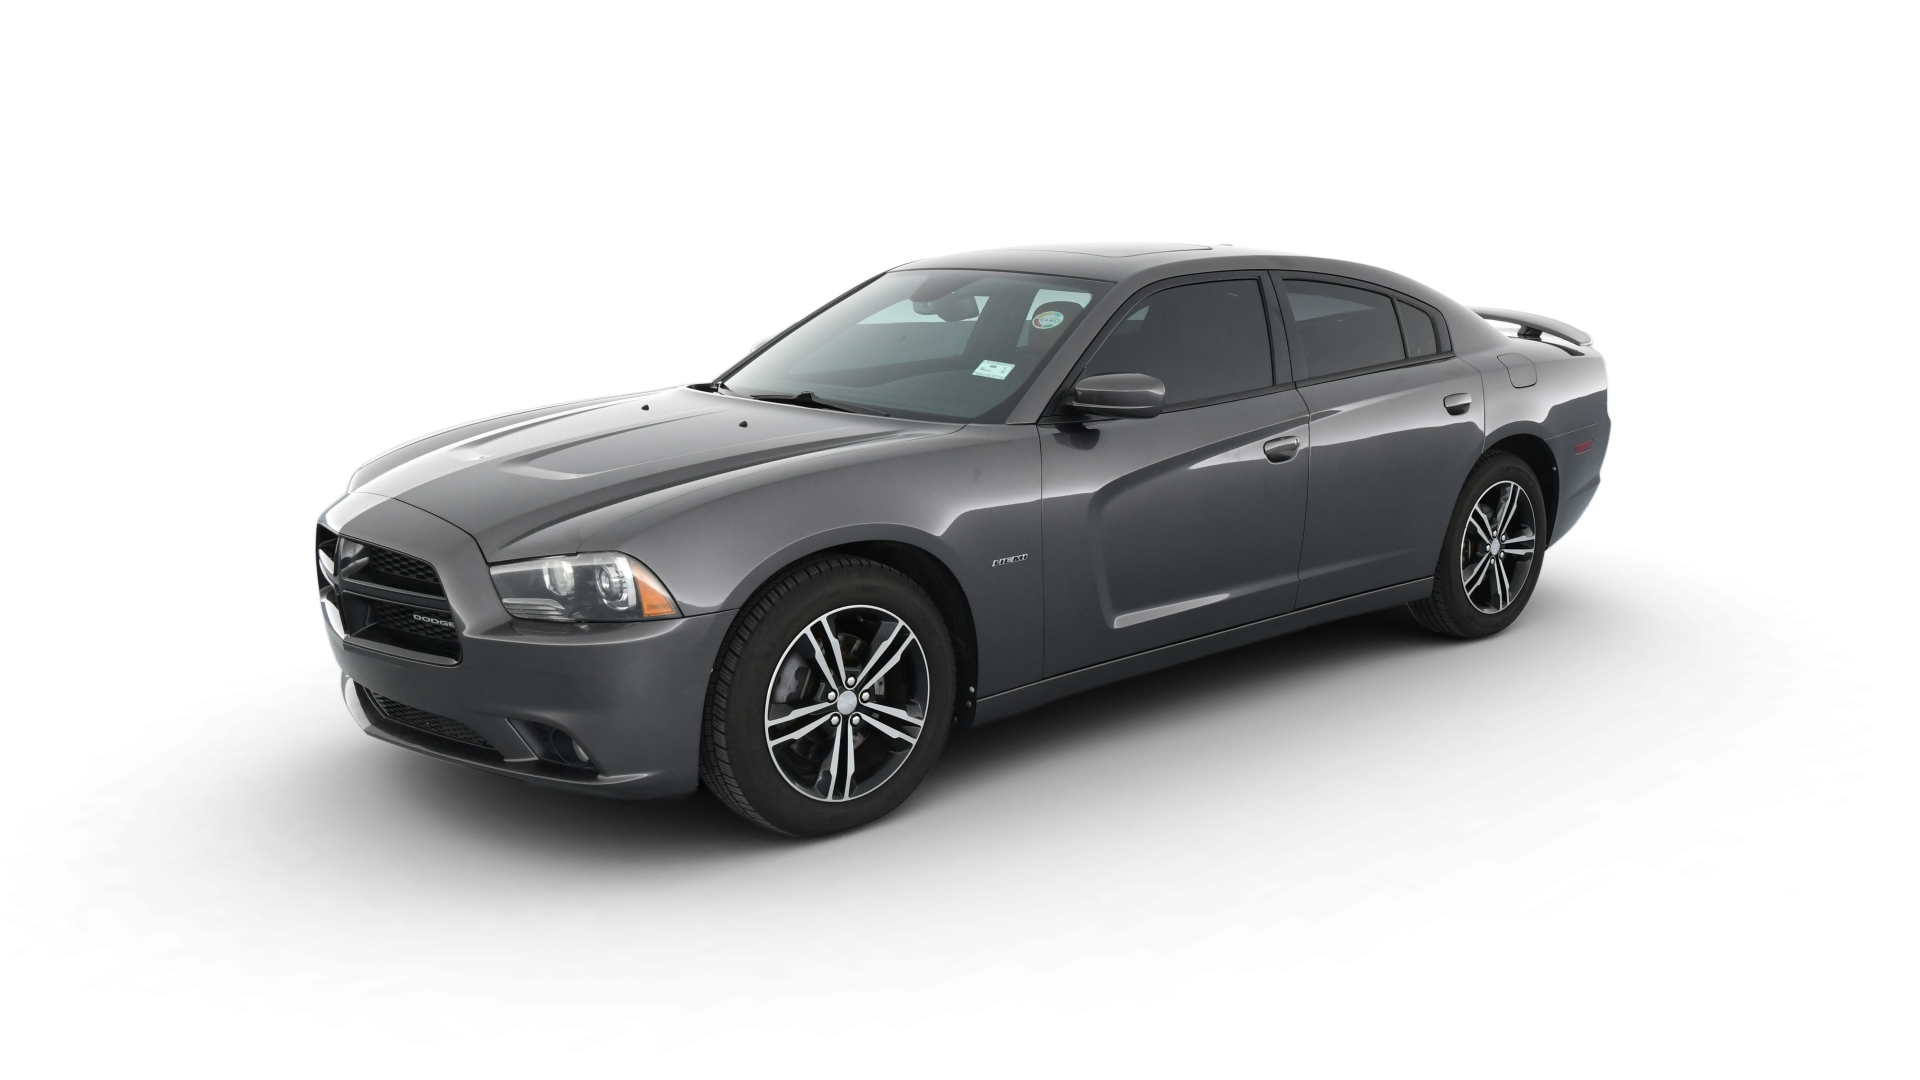 Used 2014 Dodge Charger For Sale Online | Carvana